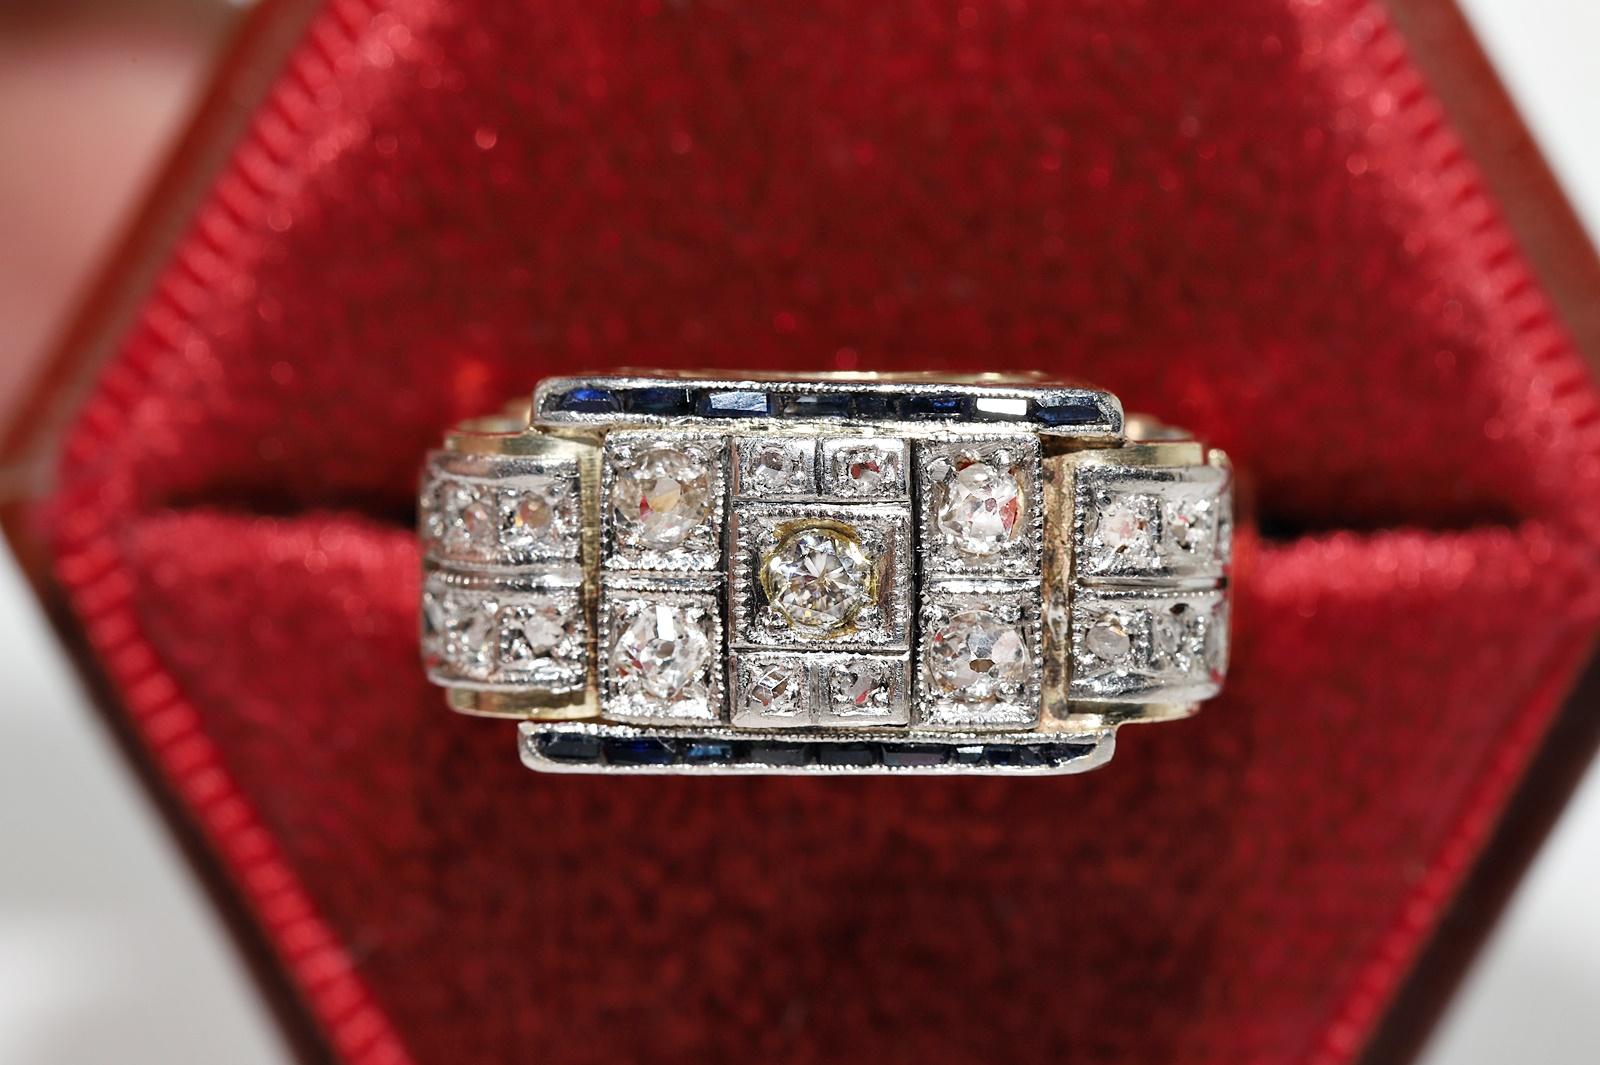 In very good condition.
Total weight is 6.6 grams.
Totally is rose cut diamond 0.15 ct.
Totally is old cut diamond 0.30 ct.
The diamond is has H-I-J-K color and s1-s2-s3-Pique1-2 clarity.
Totally is sapphire 0.35 ct.
Ring size is US 10 
We can make